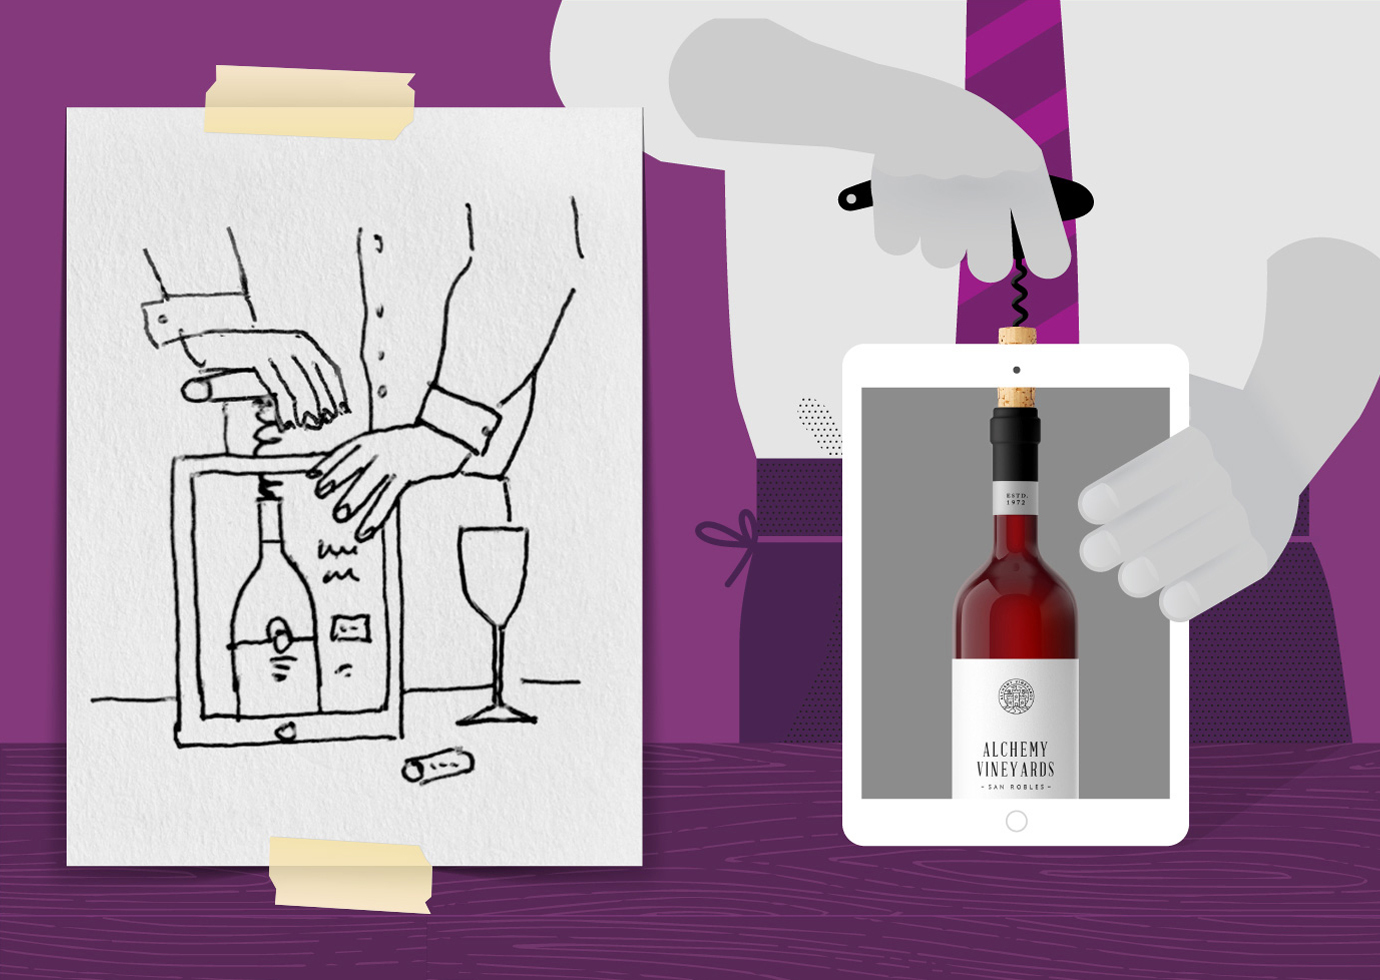 An initial sketch and final illustration of a waiter opening a bottle of wine through the screen of an iPad.